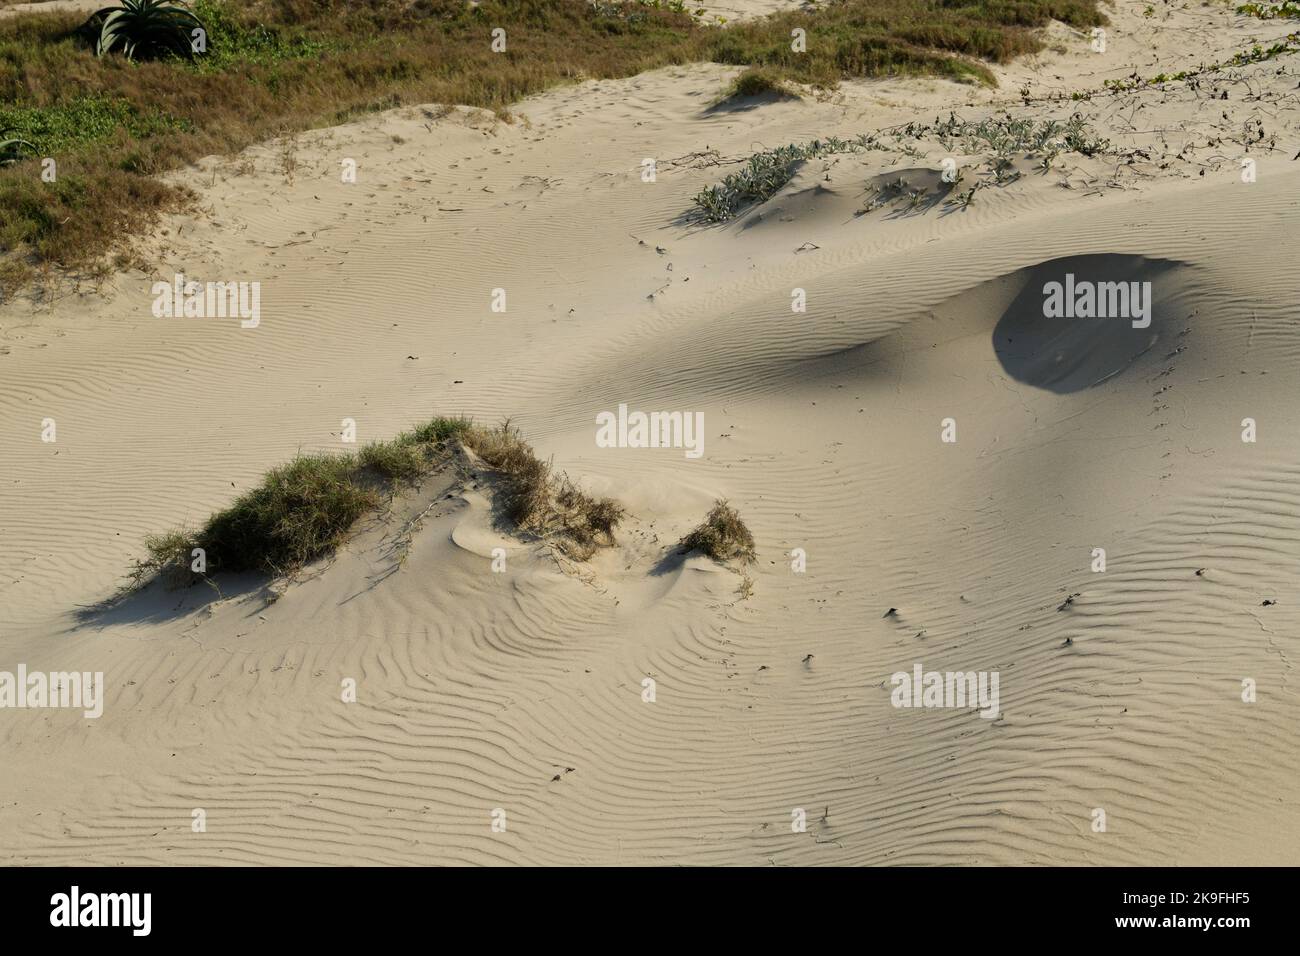 Pioneer sand dune plant growing in arid conditions, Cynodon dactylon, Couch grass, beach management, Durban, KwaZulu-Natal, South Africa, growth Stock Photo